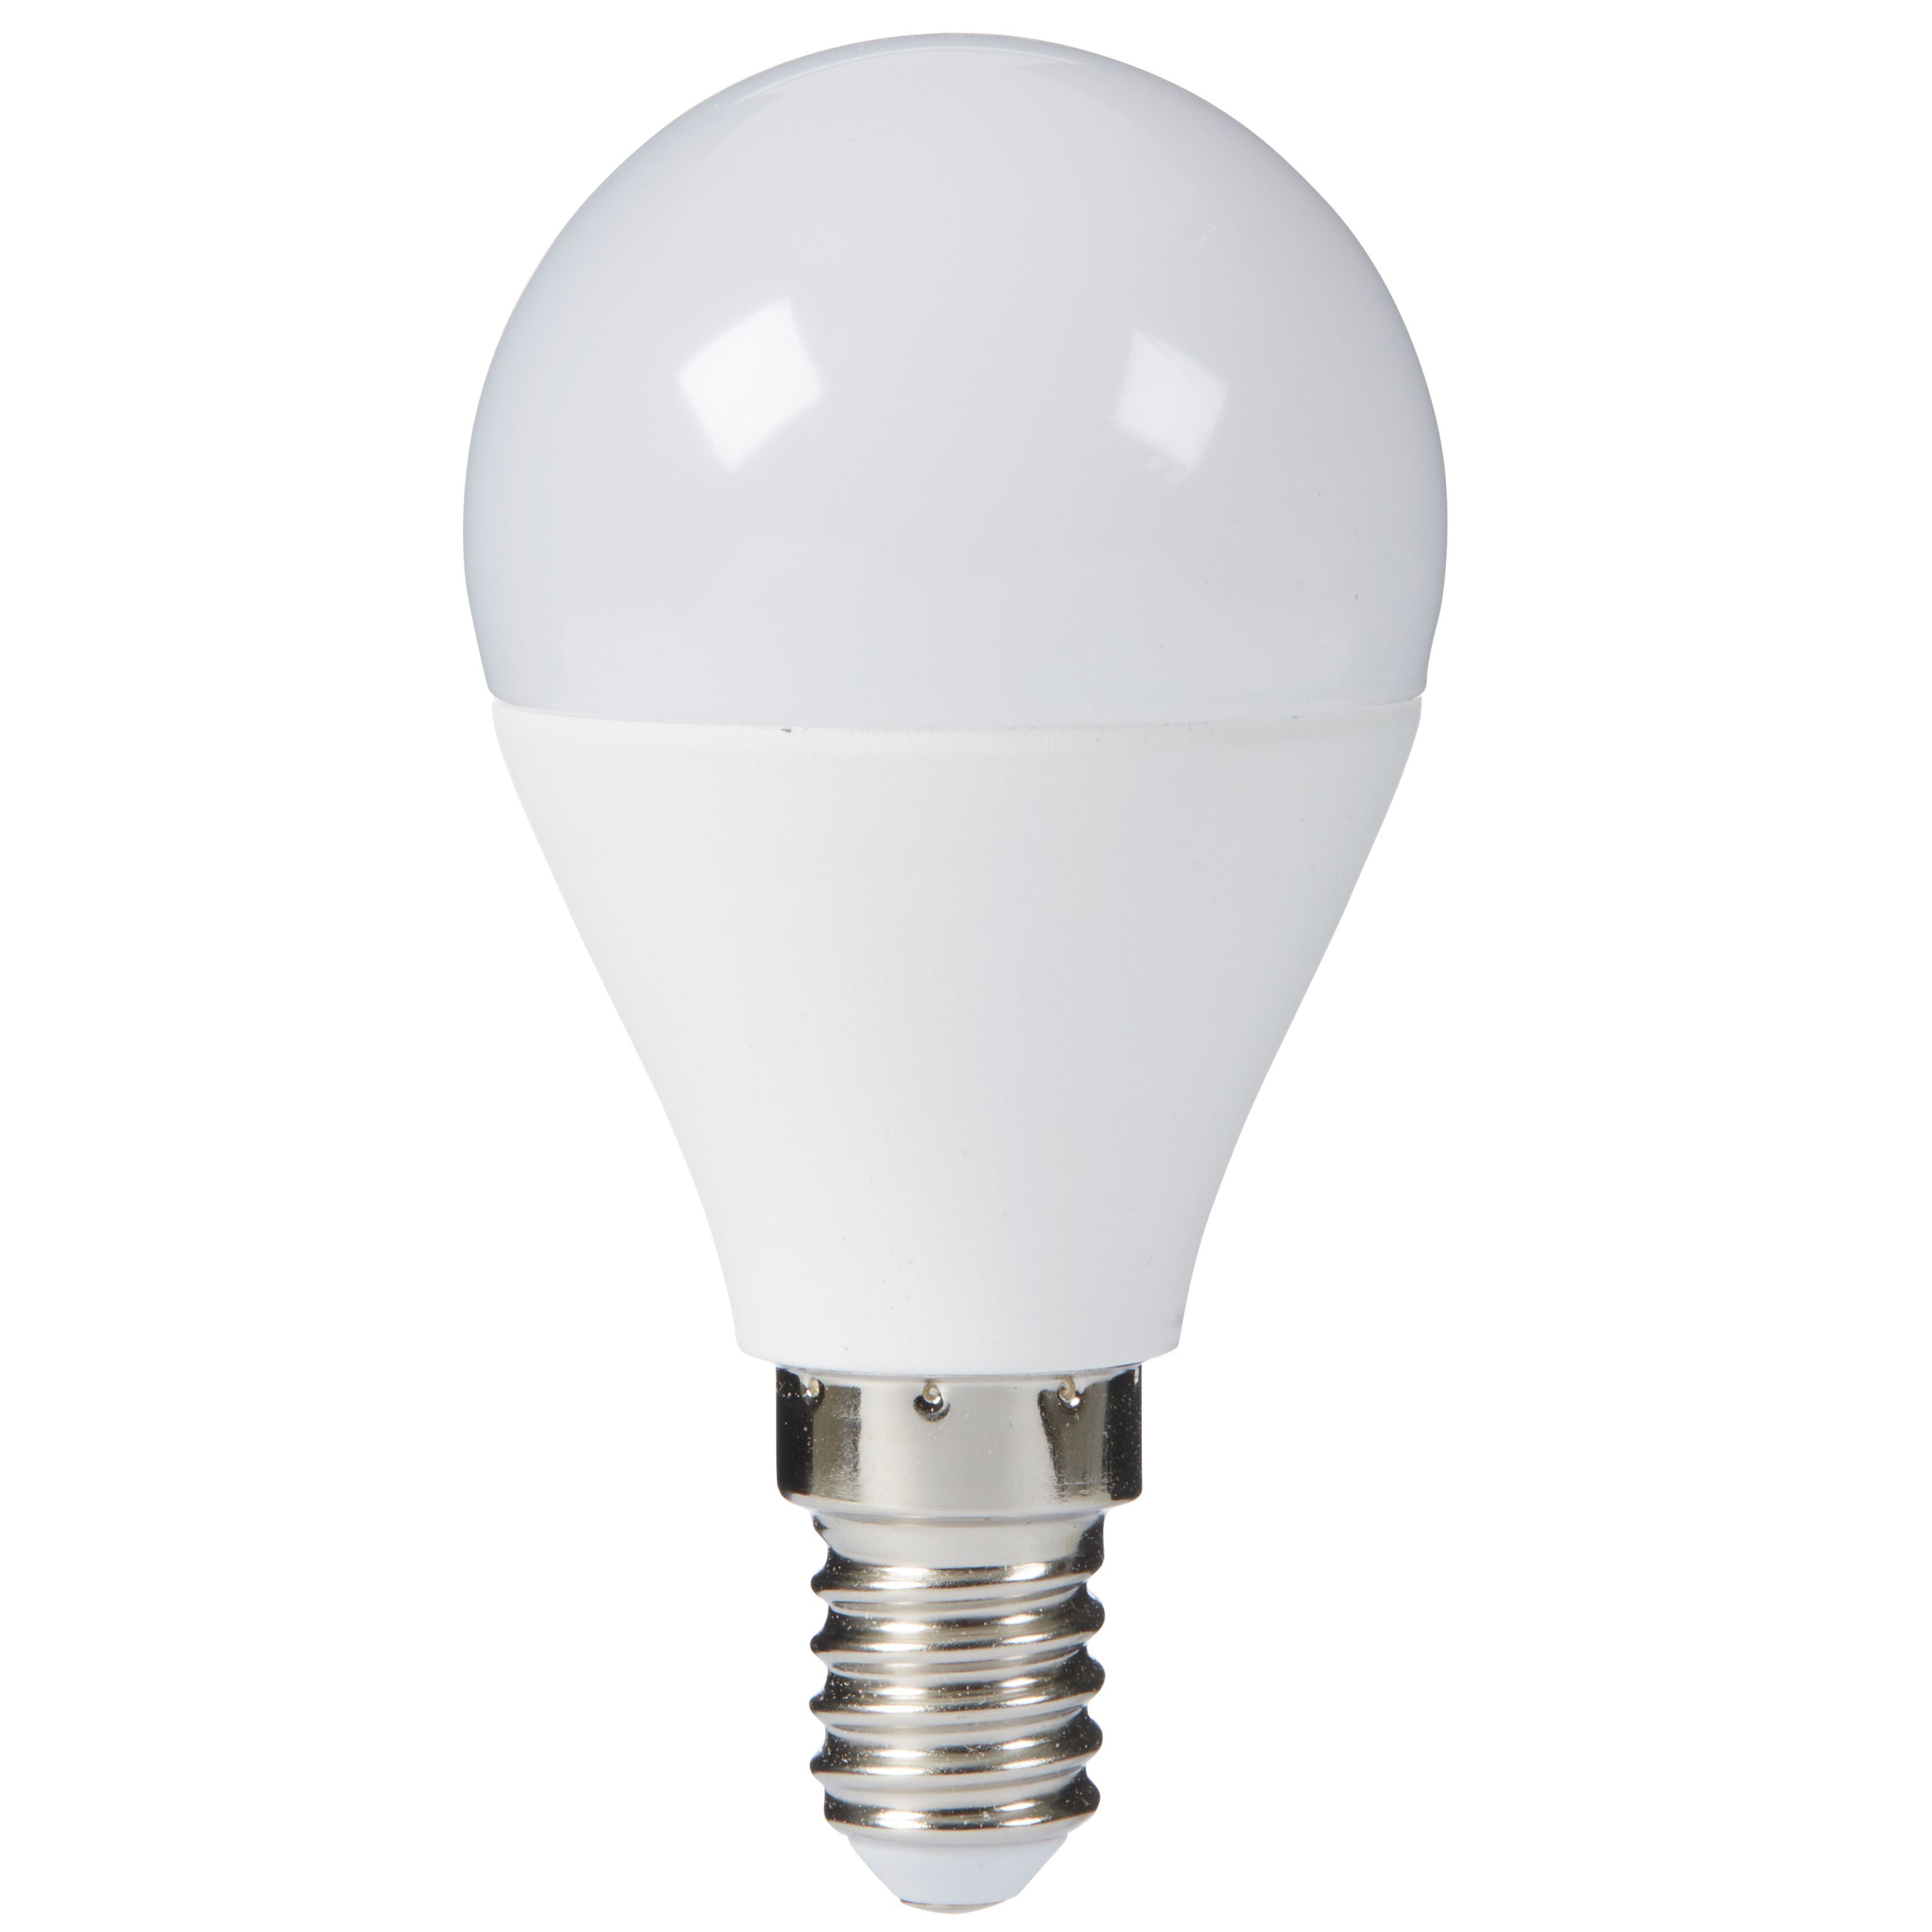 Diall 806lm Classic Warm white LED Light bulb, Pack of 3